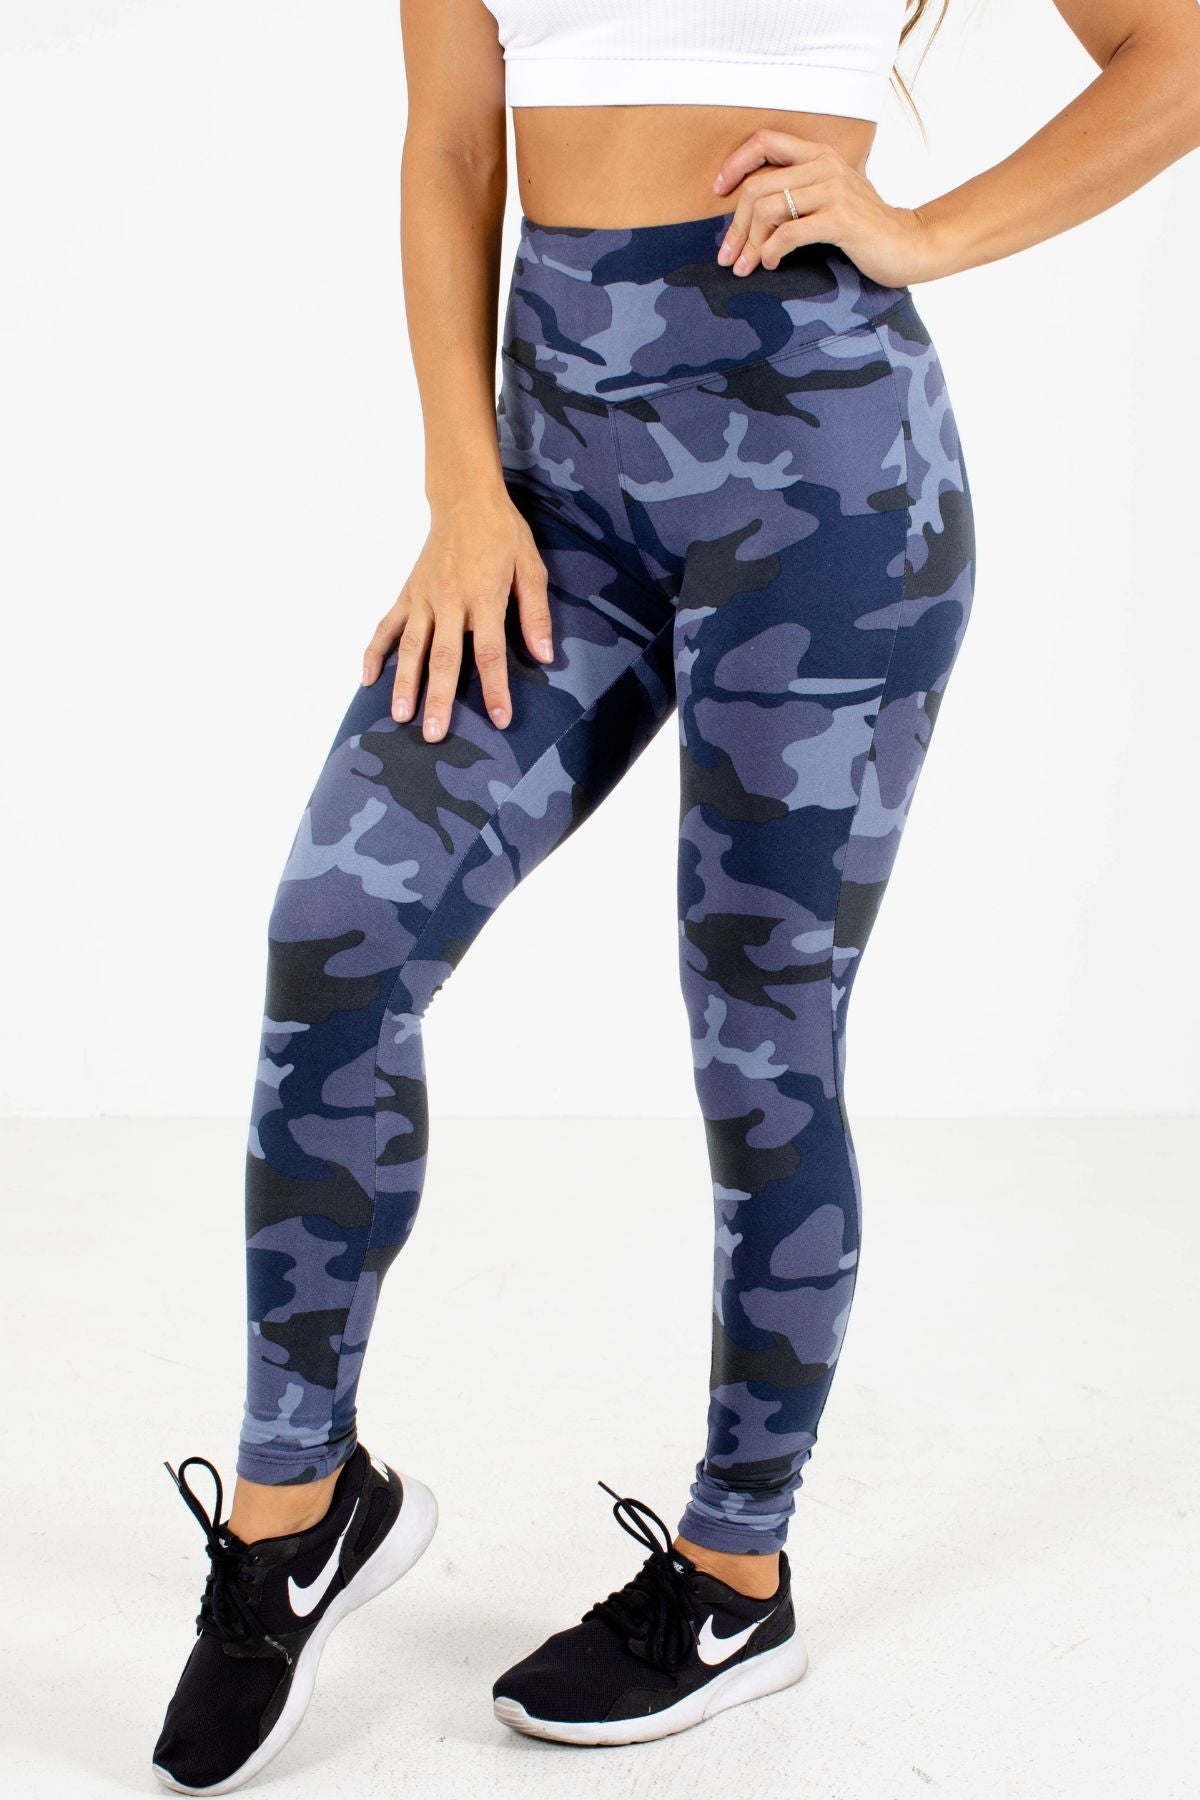 In The Field Camo High Waisted Leggings – TheBrownEyedGirl Boutique